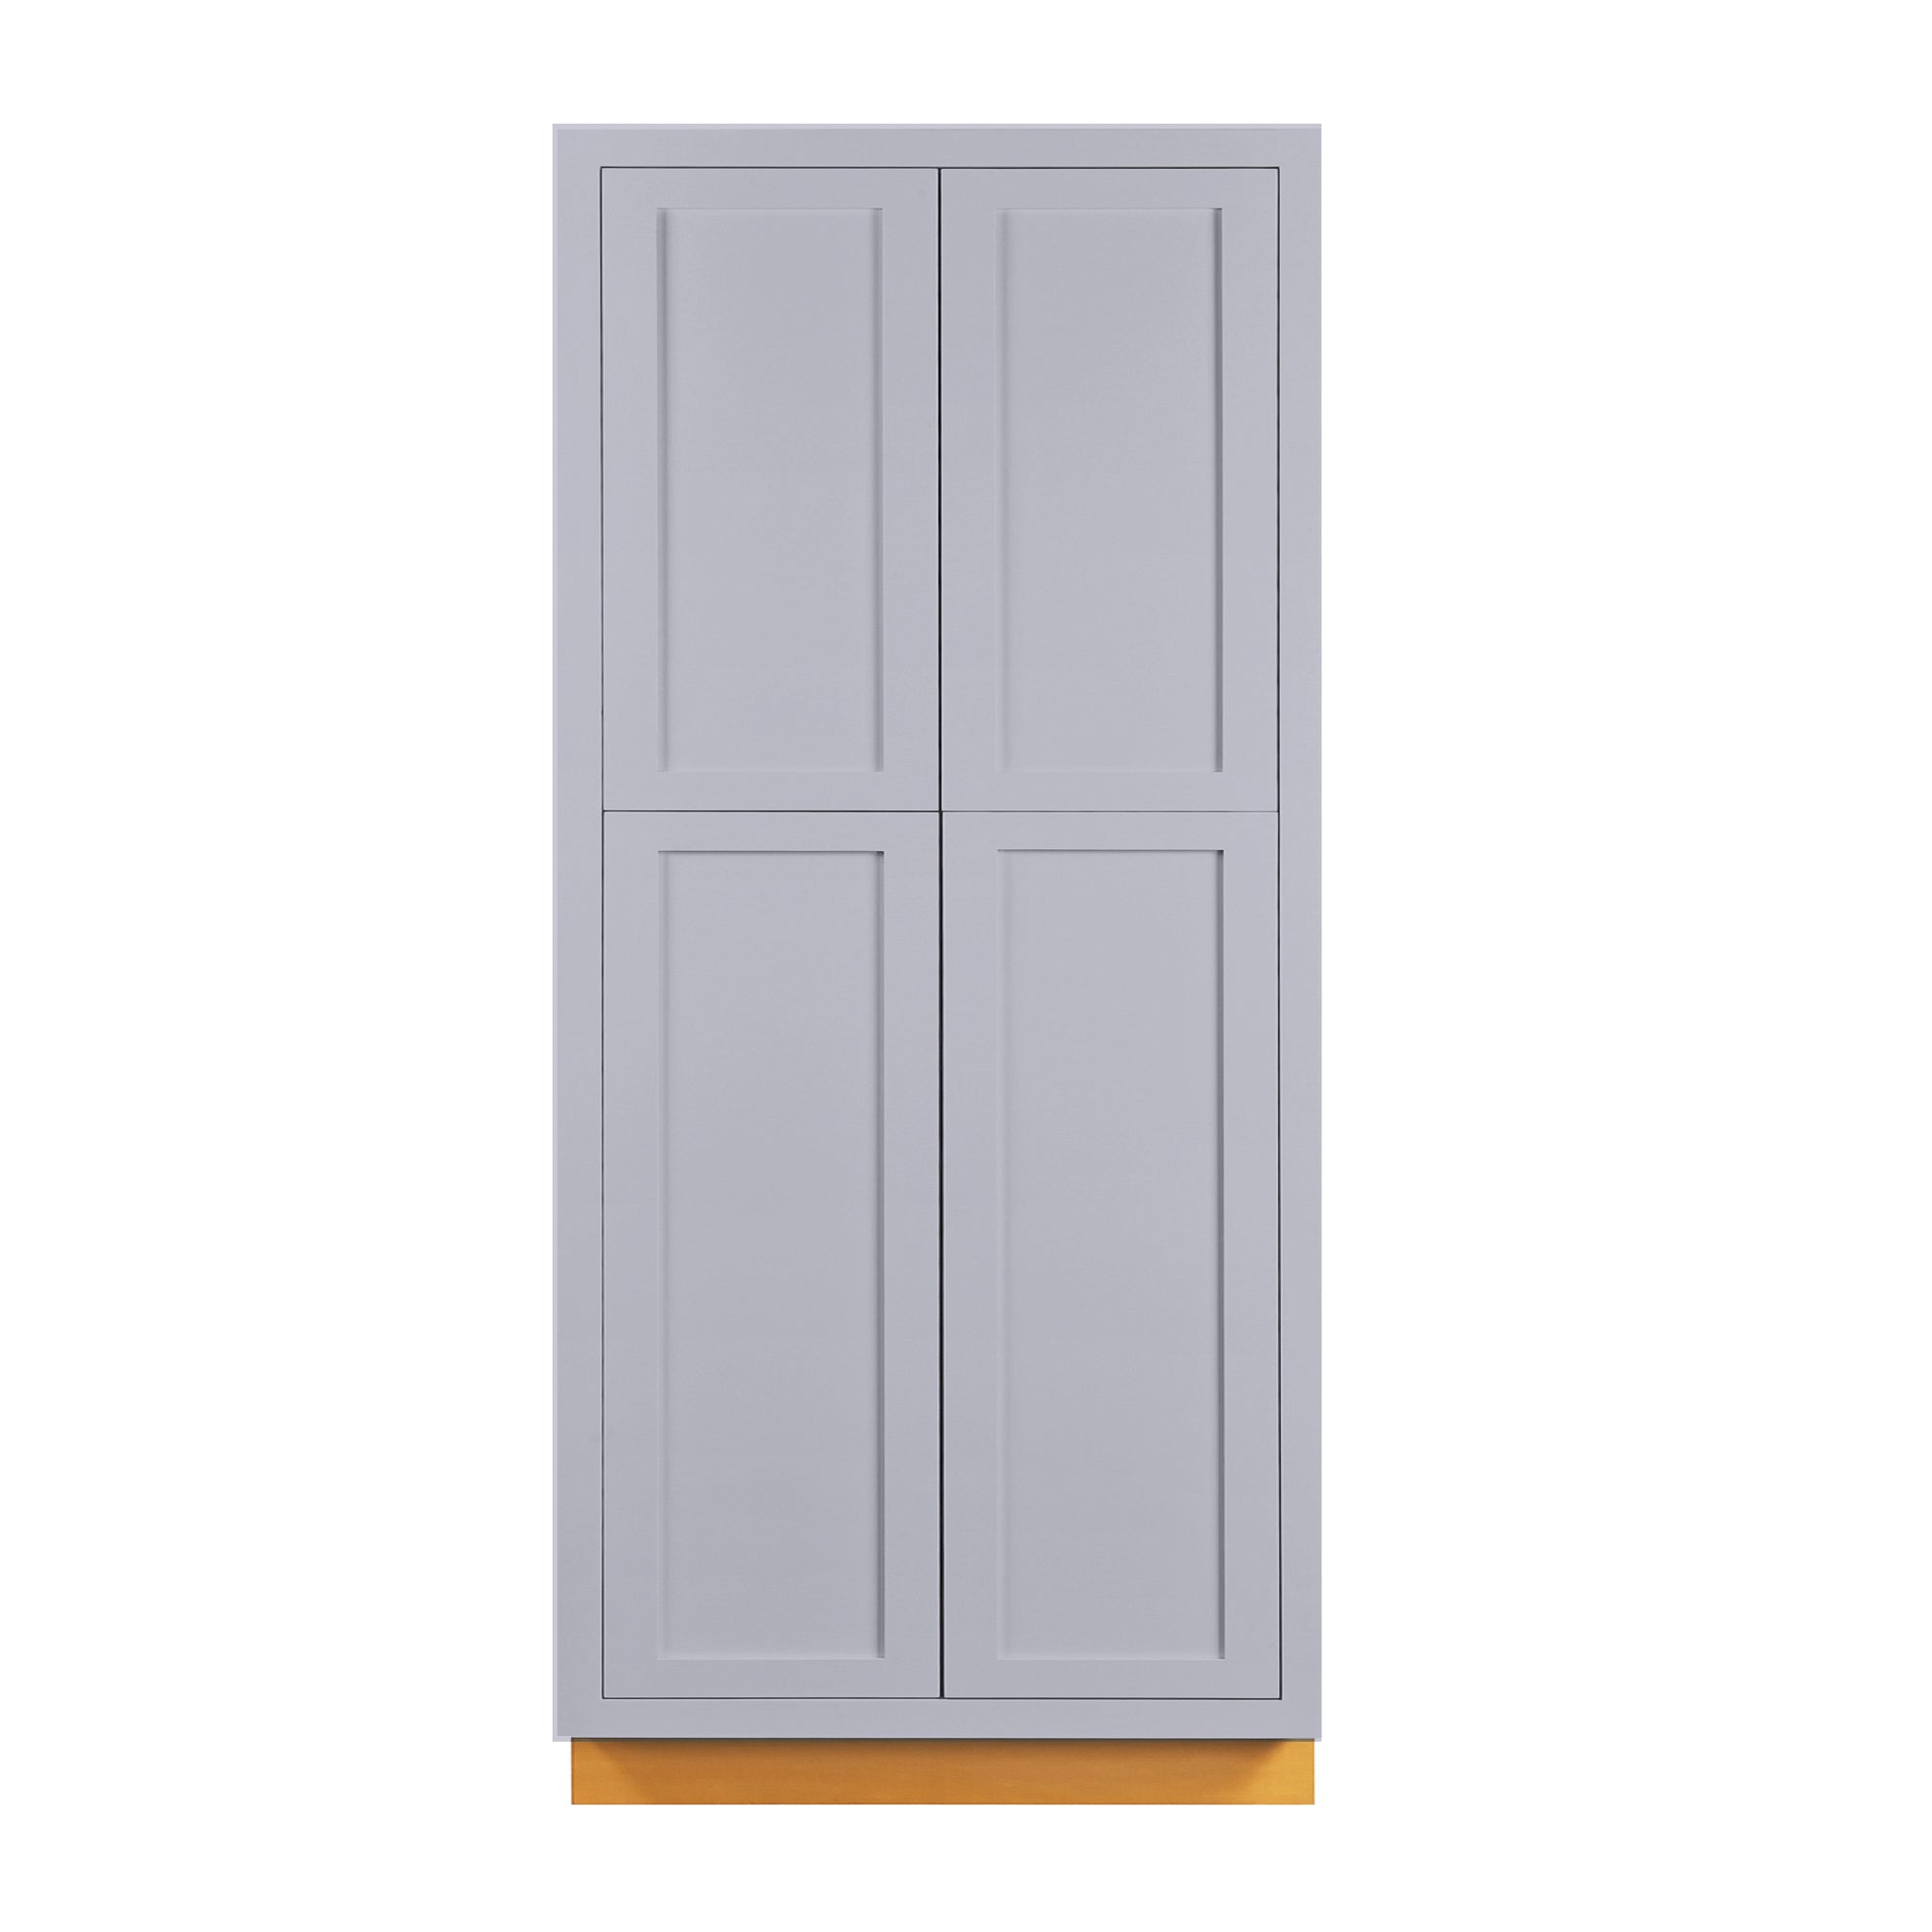 Pantry Light Gray Inset Shaker Cabinet 93" Tall 36" Wide